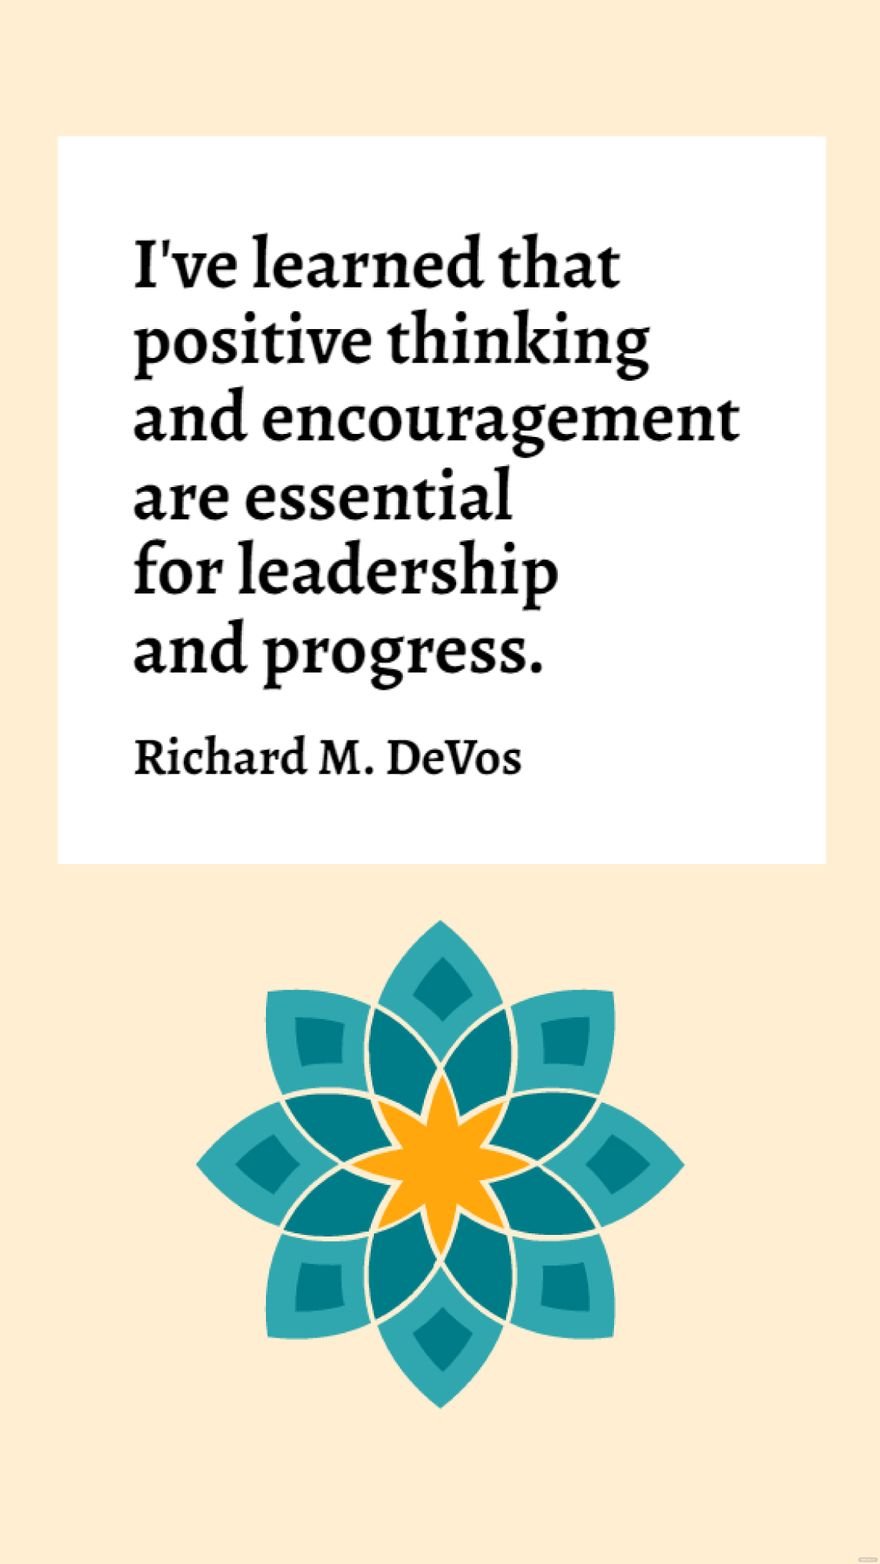 Free Richard M. DeVos - I've learned that positive thinking and encouragement are essential for leadership and progress. in JPG